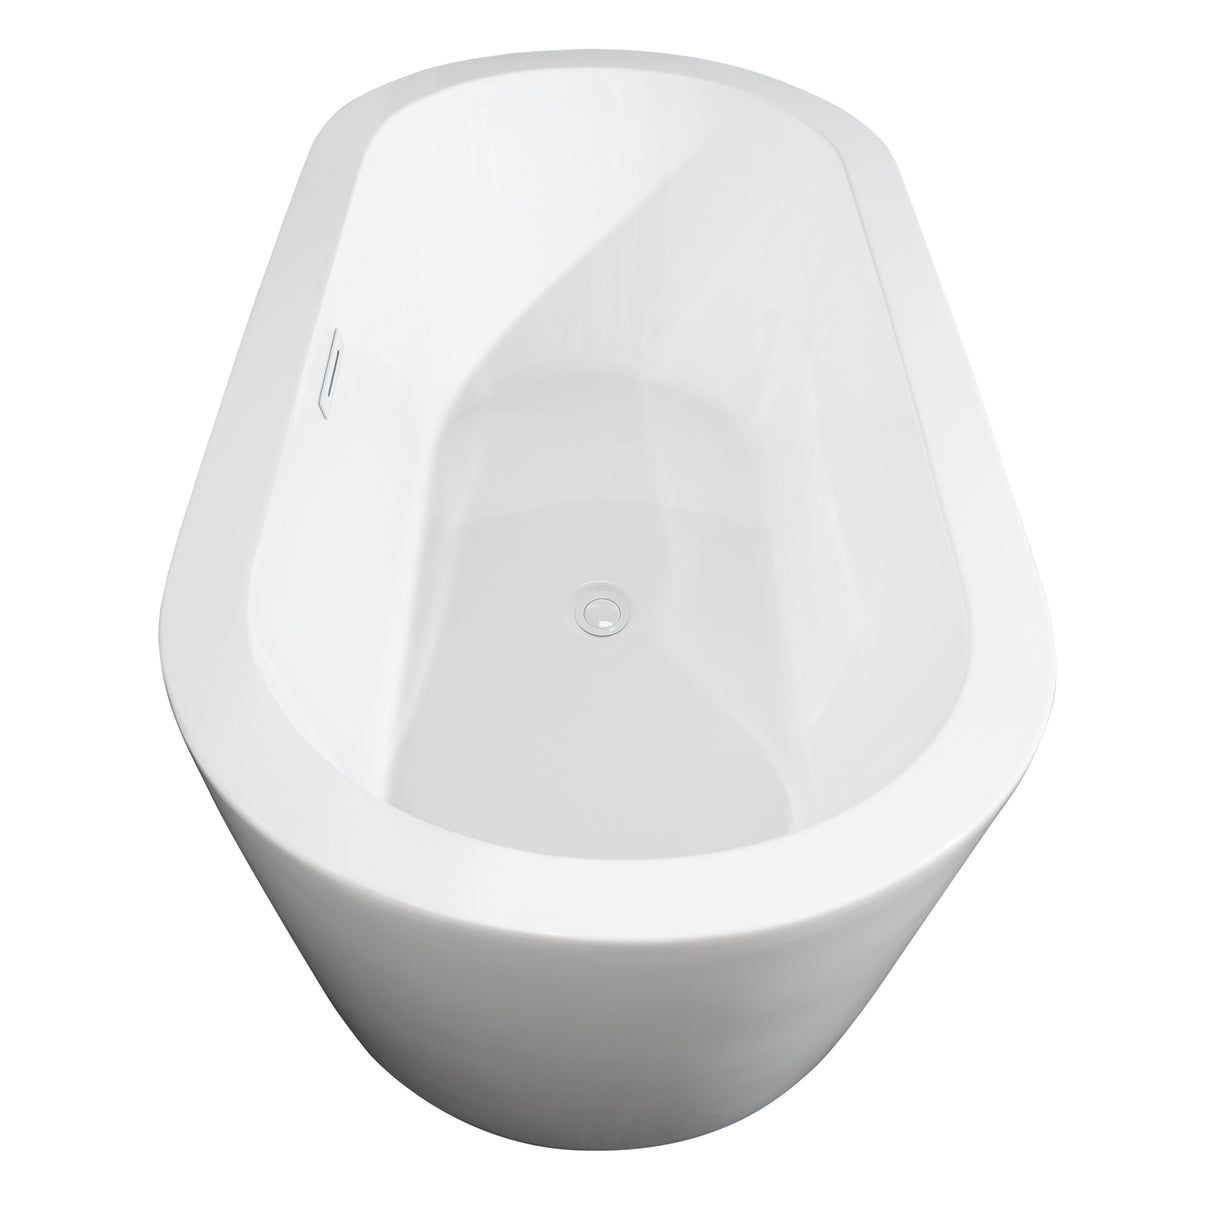 Mermaid 71 Inch Freestanding Bathtub in White with Shiny White Drain and Overflow Trim